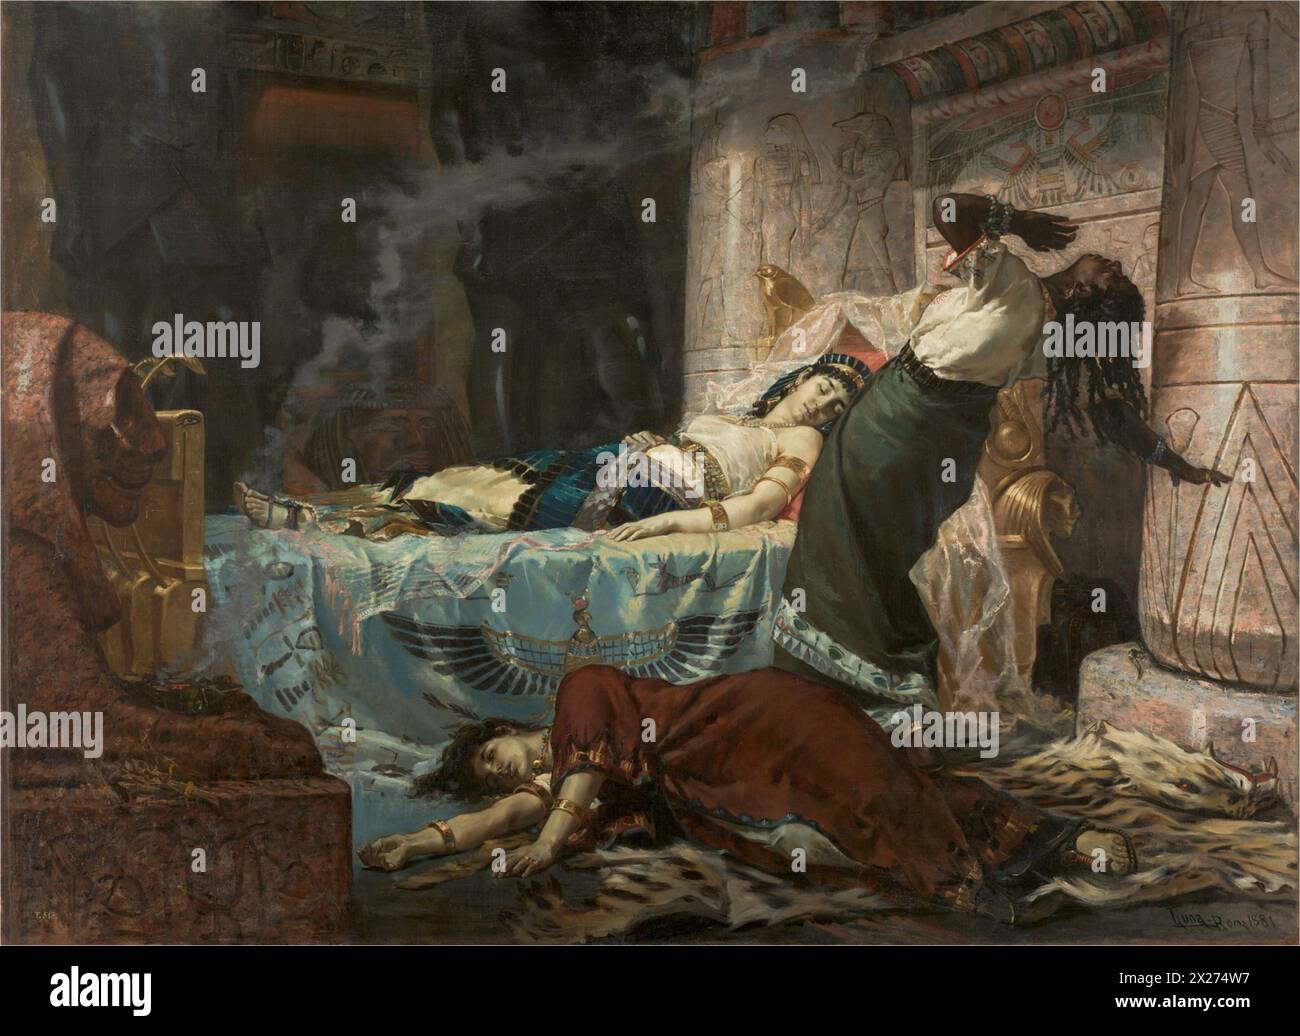 The Death of Cleopatra (Spanish: La muerte de Cleopatra),[1] also known simply as Cleopatra,[2] is an 1881 oil painting on canvas by the Filipino painter Juan Luna, Stock Photo